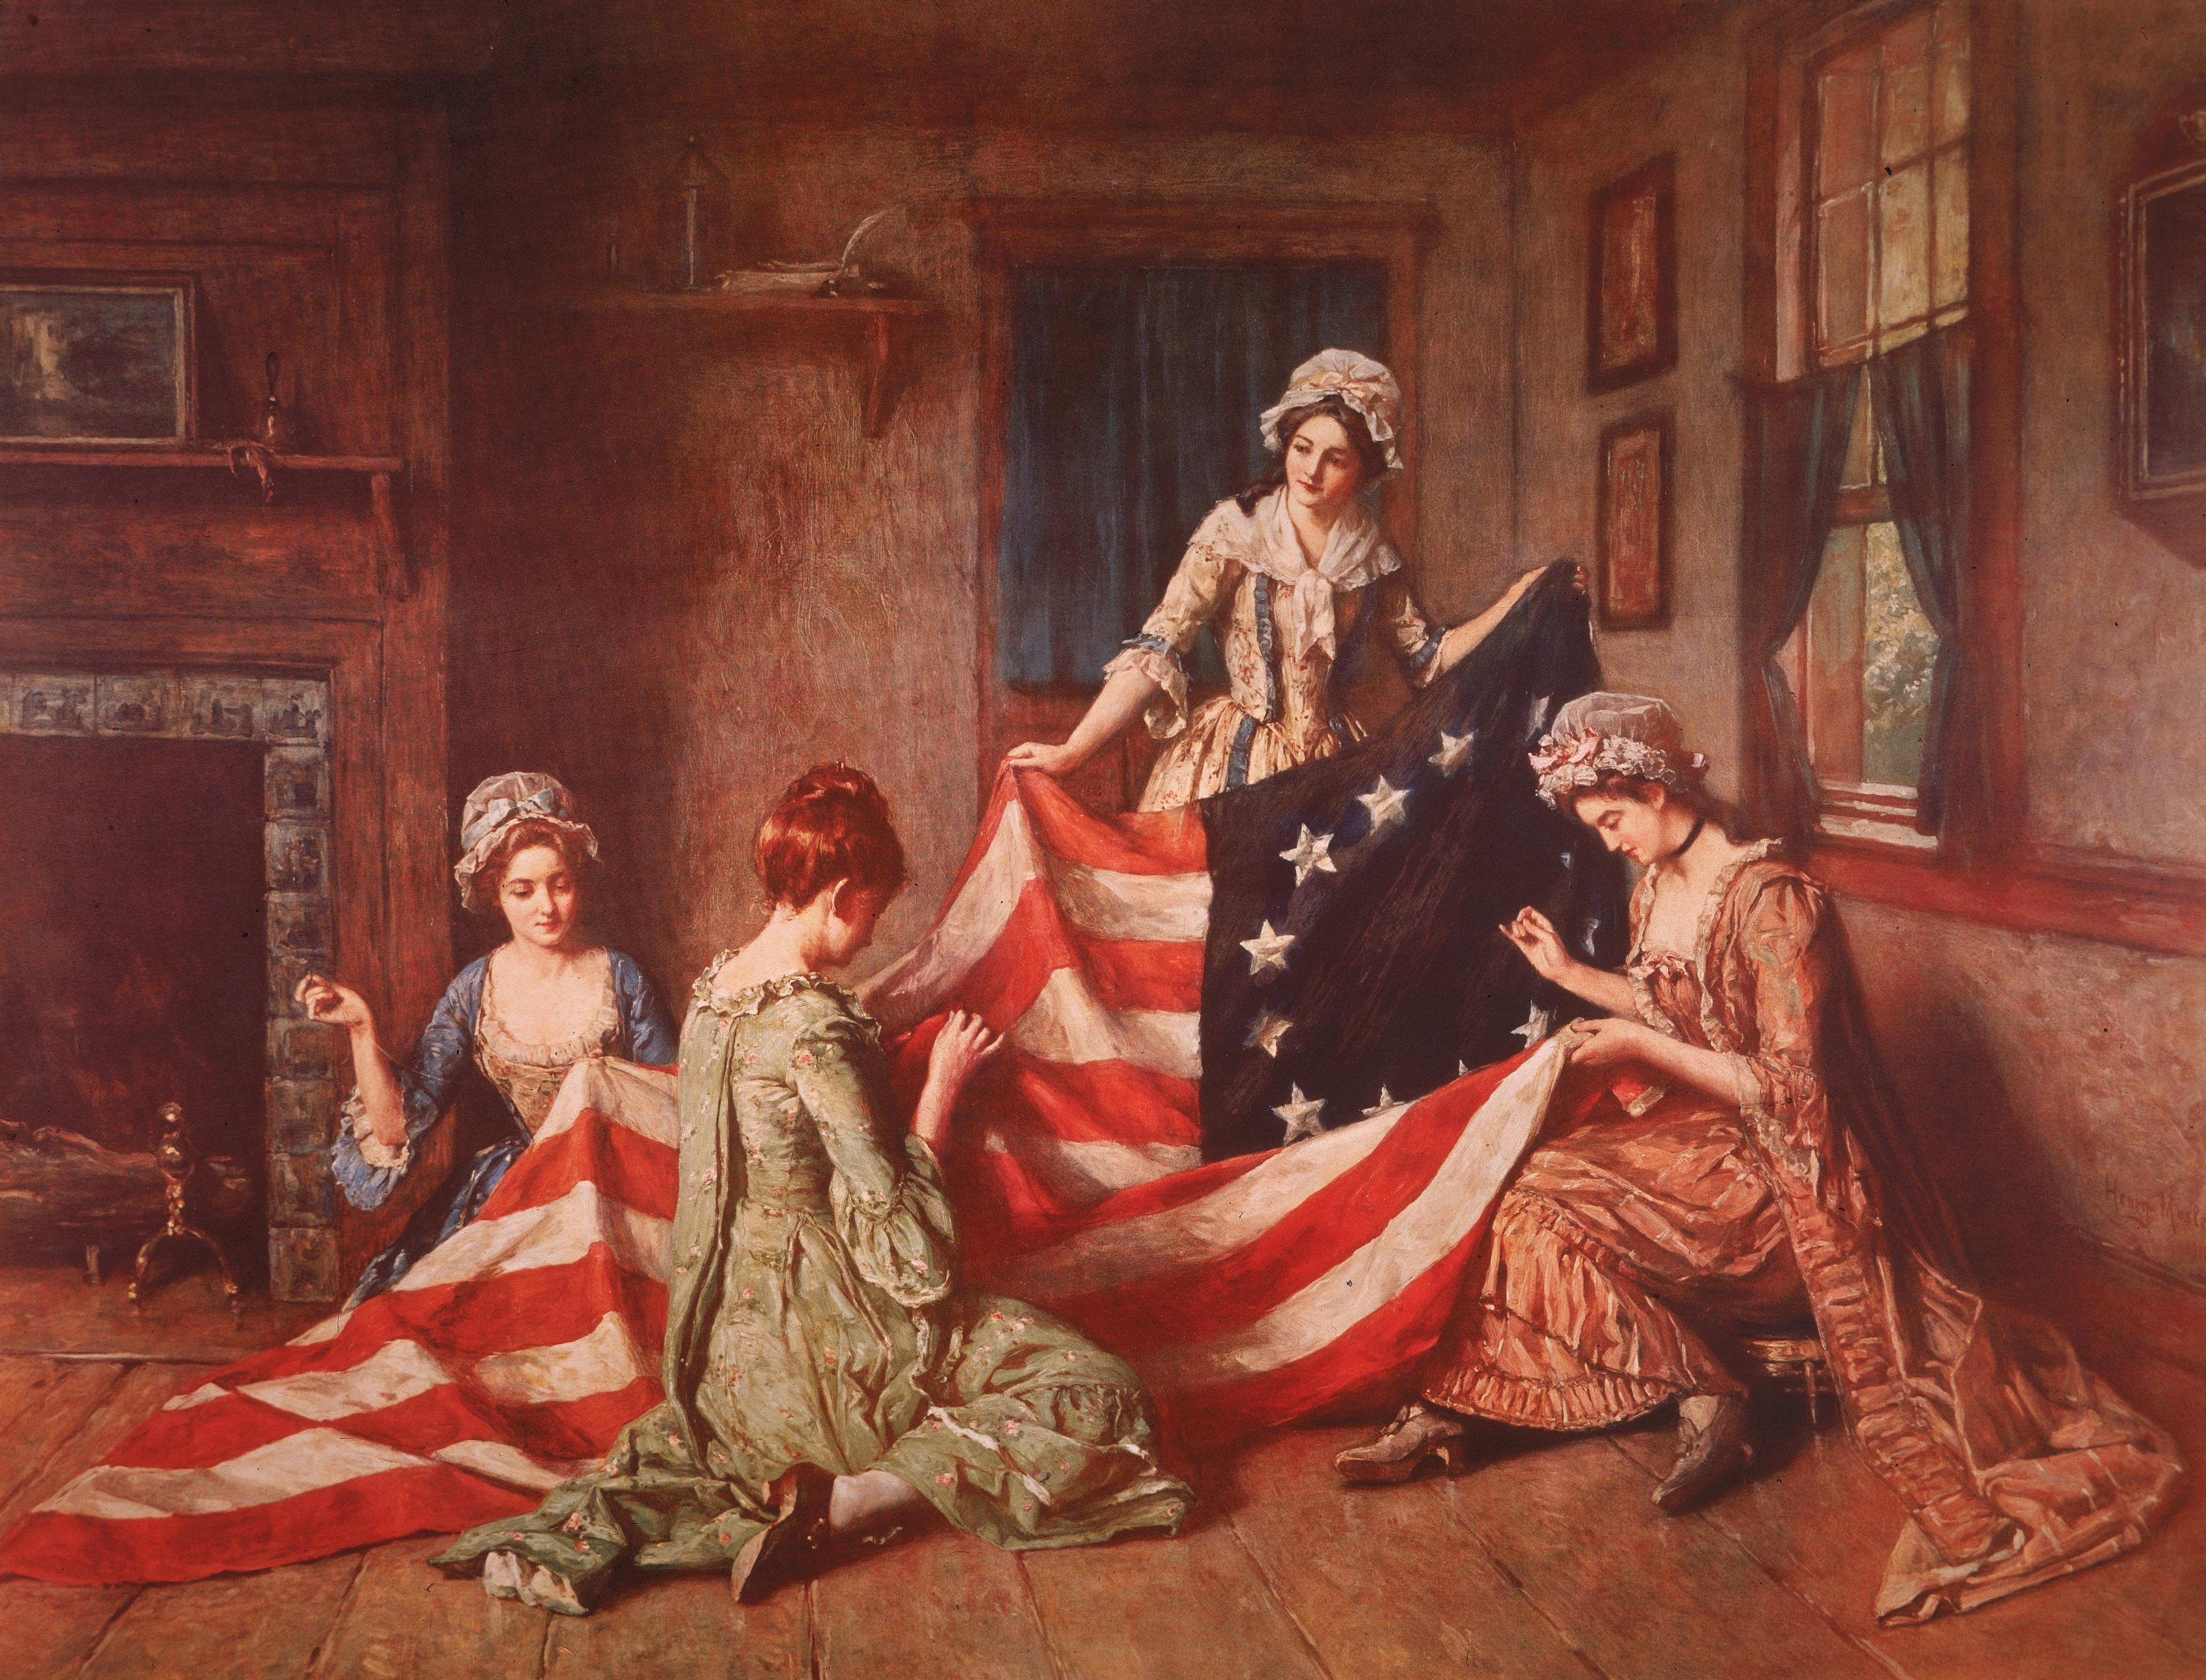 Henry Mosler, Betsy Ross Making the First American Flag, c.1870.